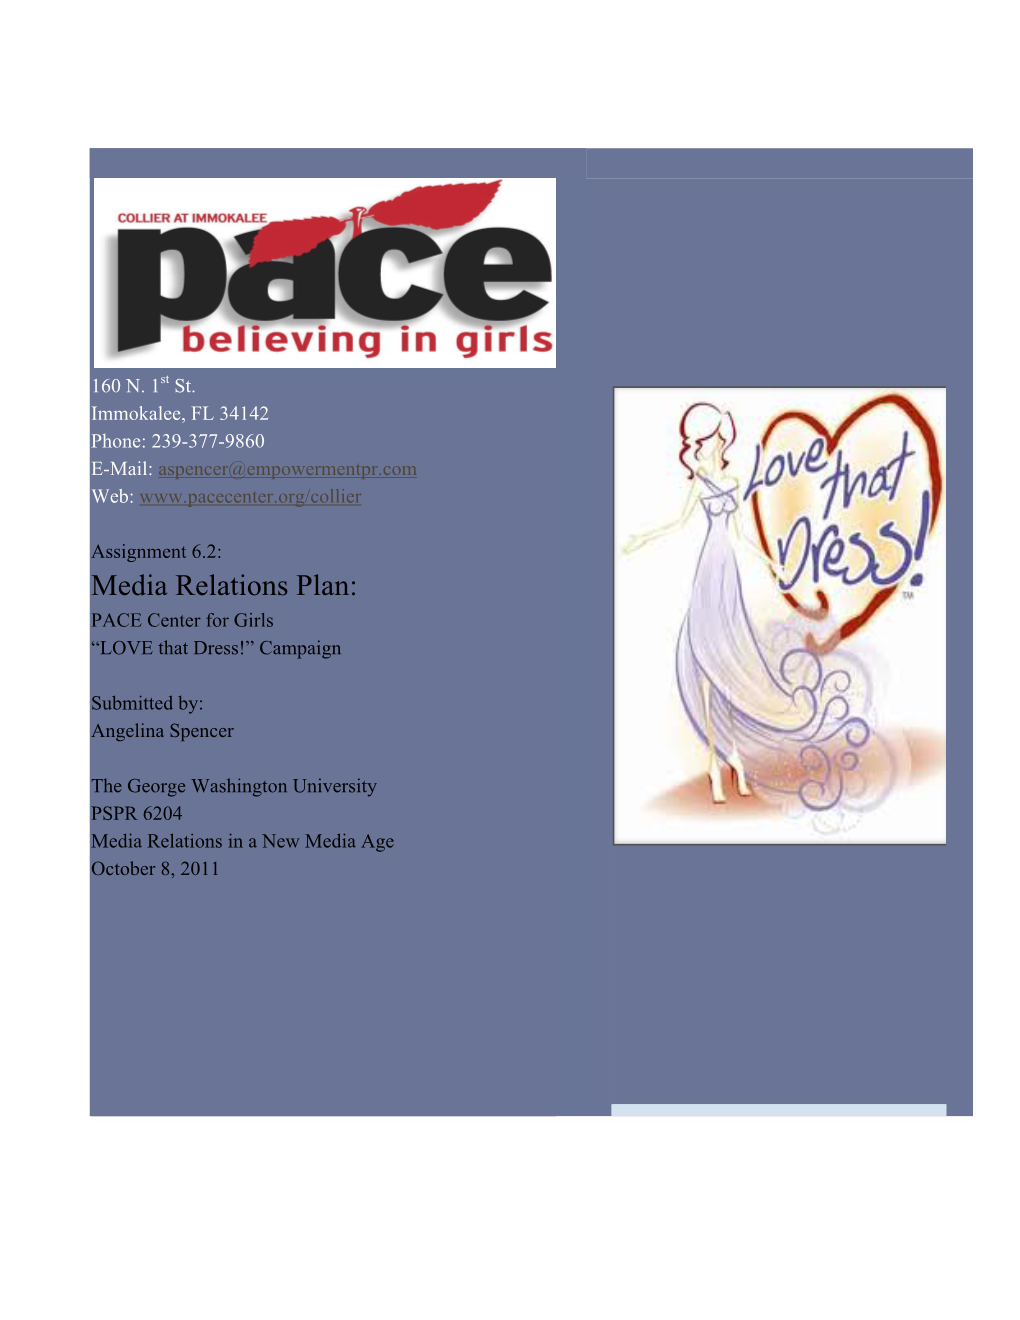 Media Relations Plan: PACE Center for Girls “LOVE That Dress!” Campaign